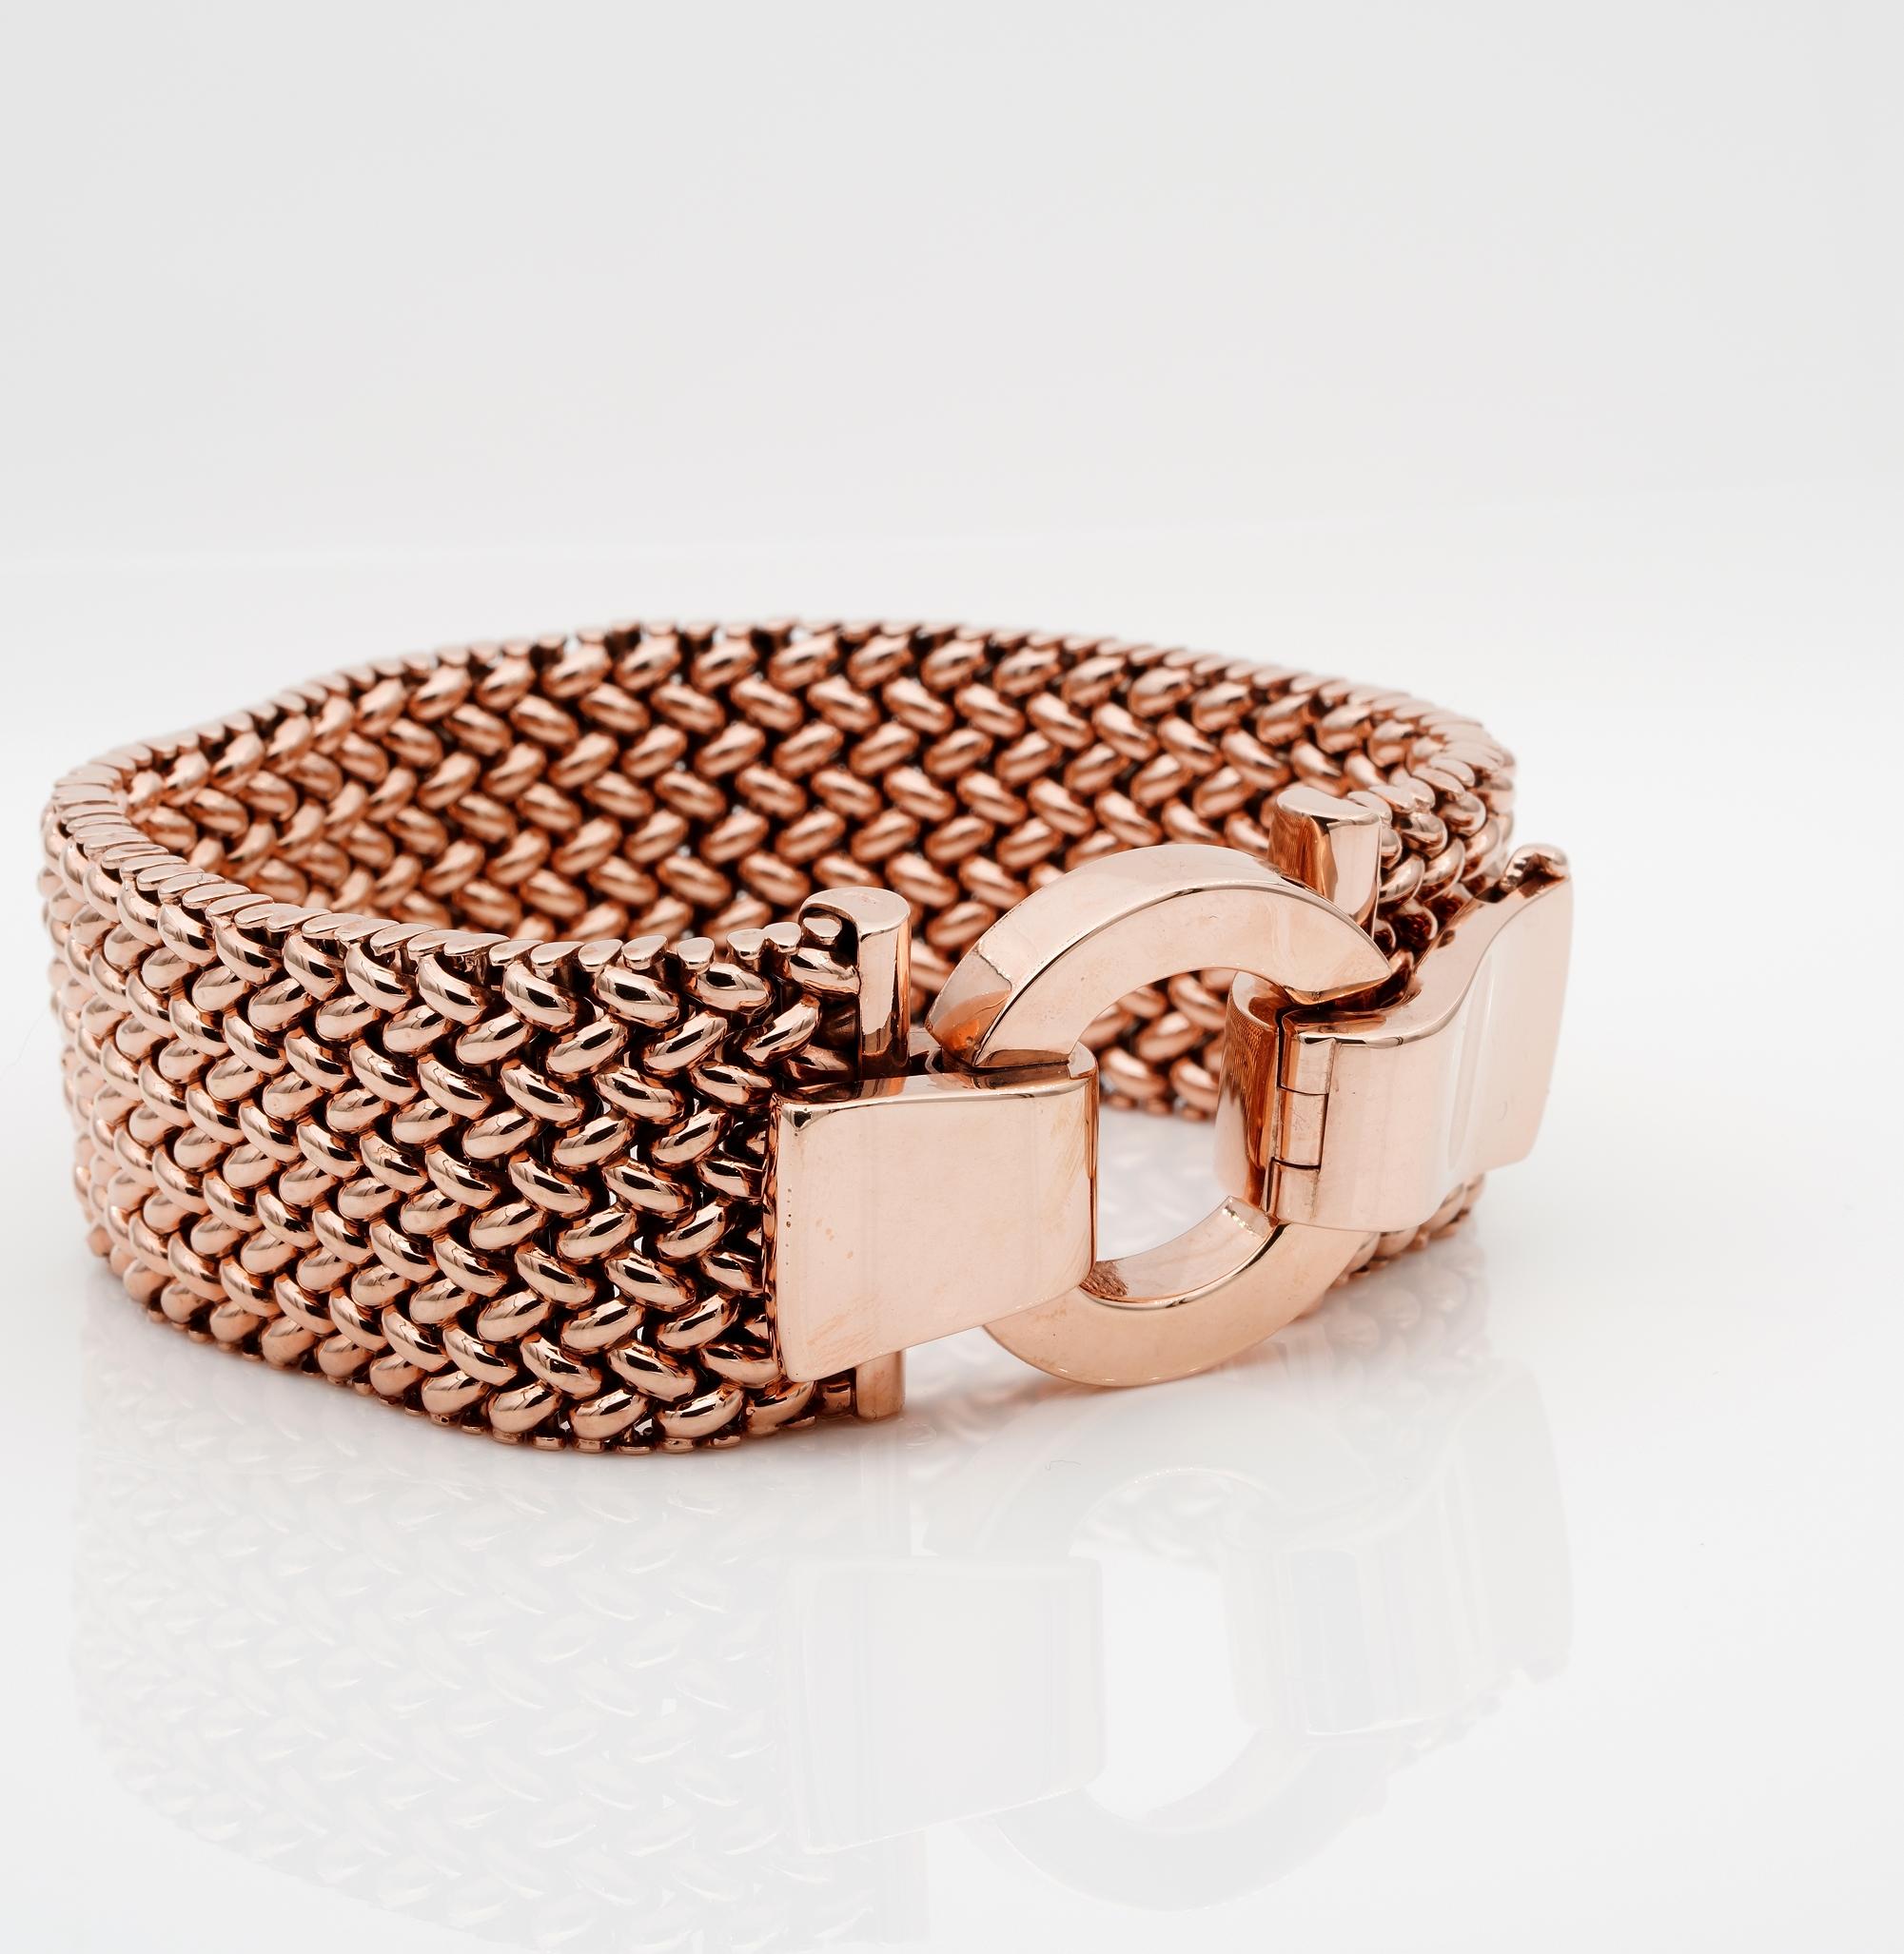 Art Deco Woven Strap 18 KT Rose Gold  Buckle Bracelet In Good Condition For Sale In Napoli, IT